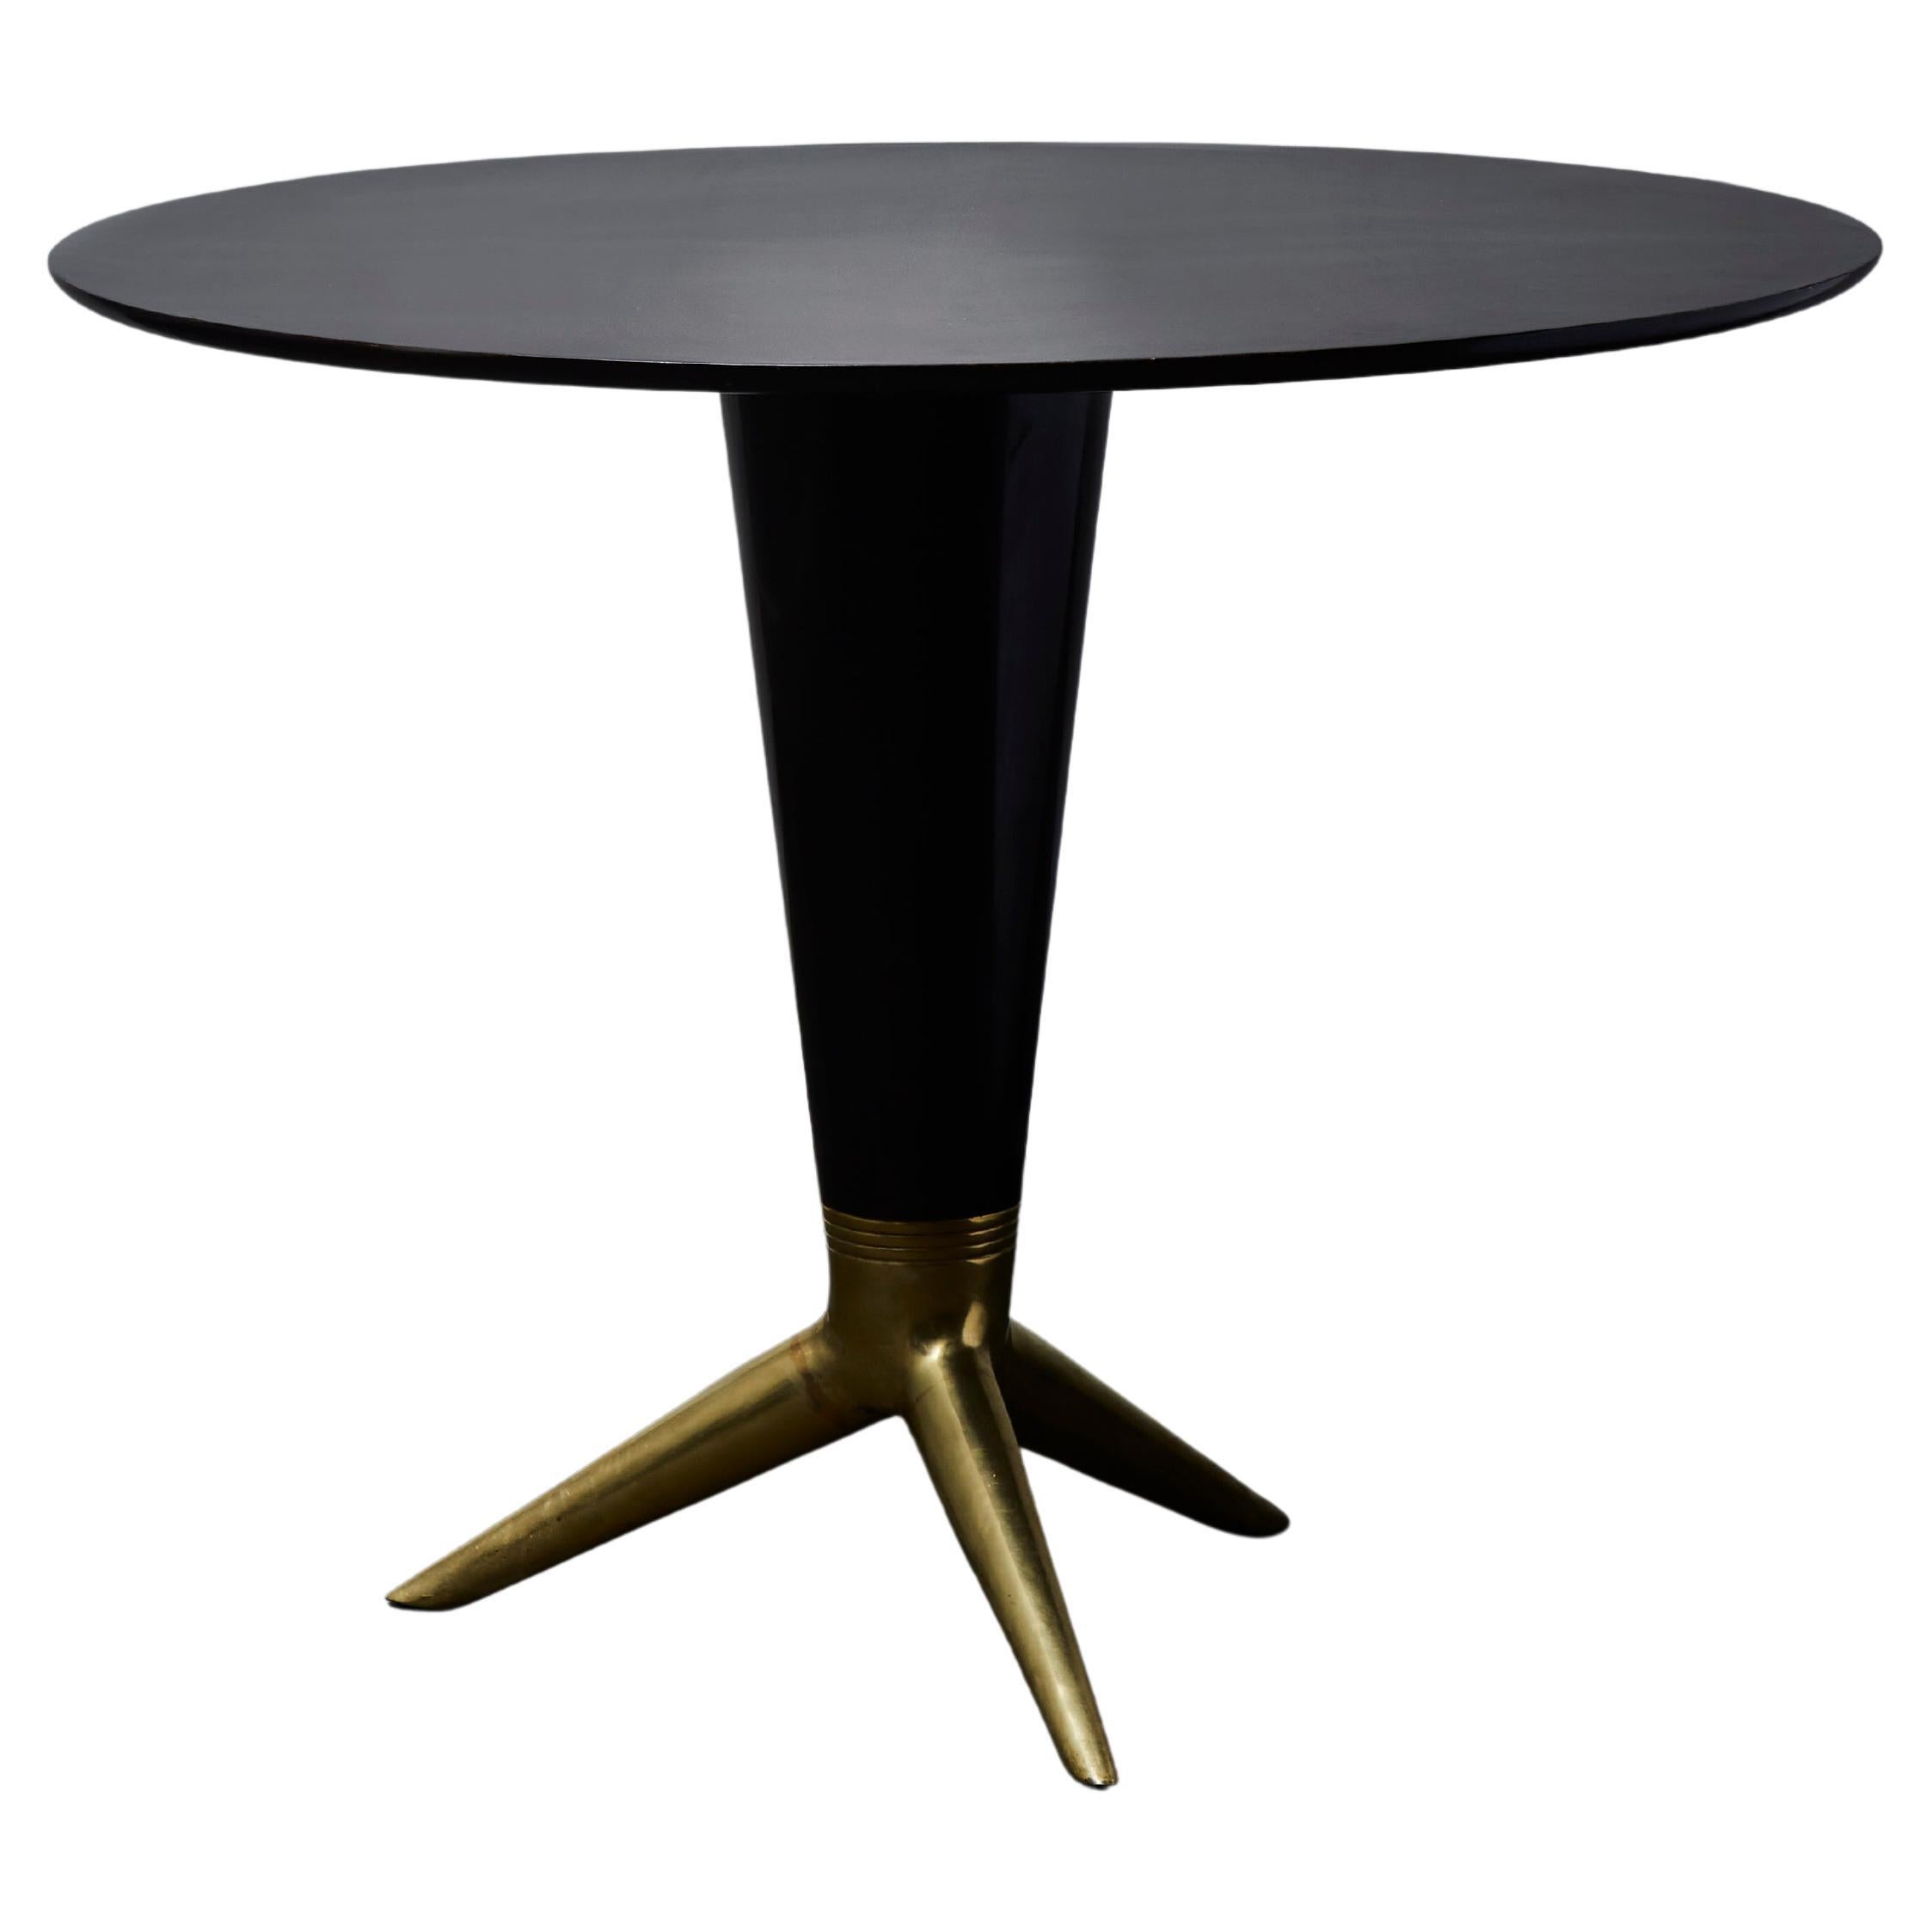 Gio Ponti Table at Cost Price For Sale